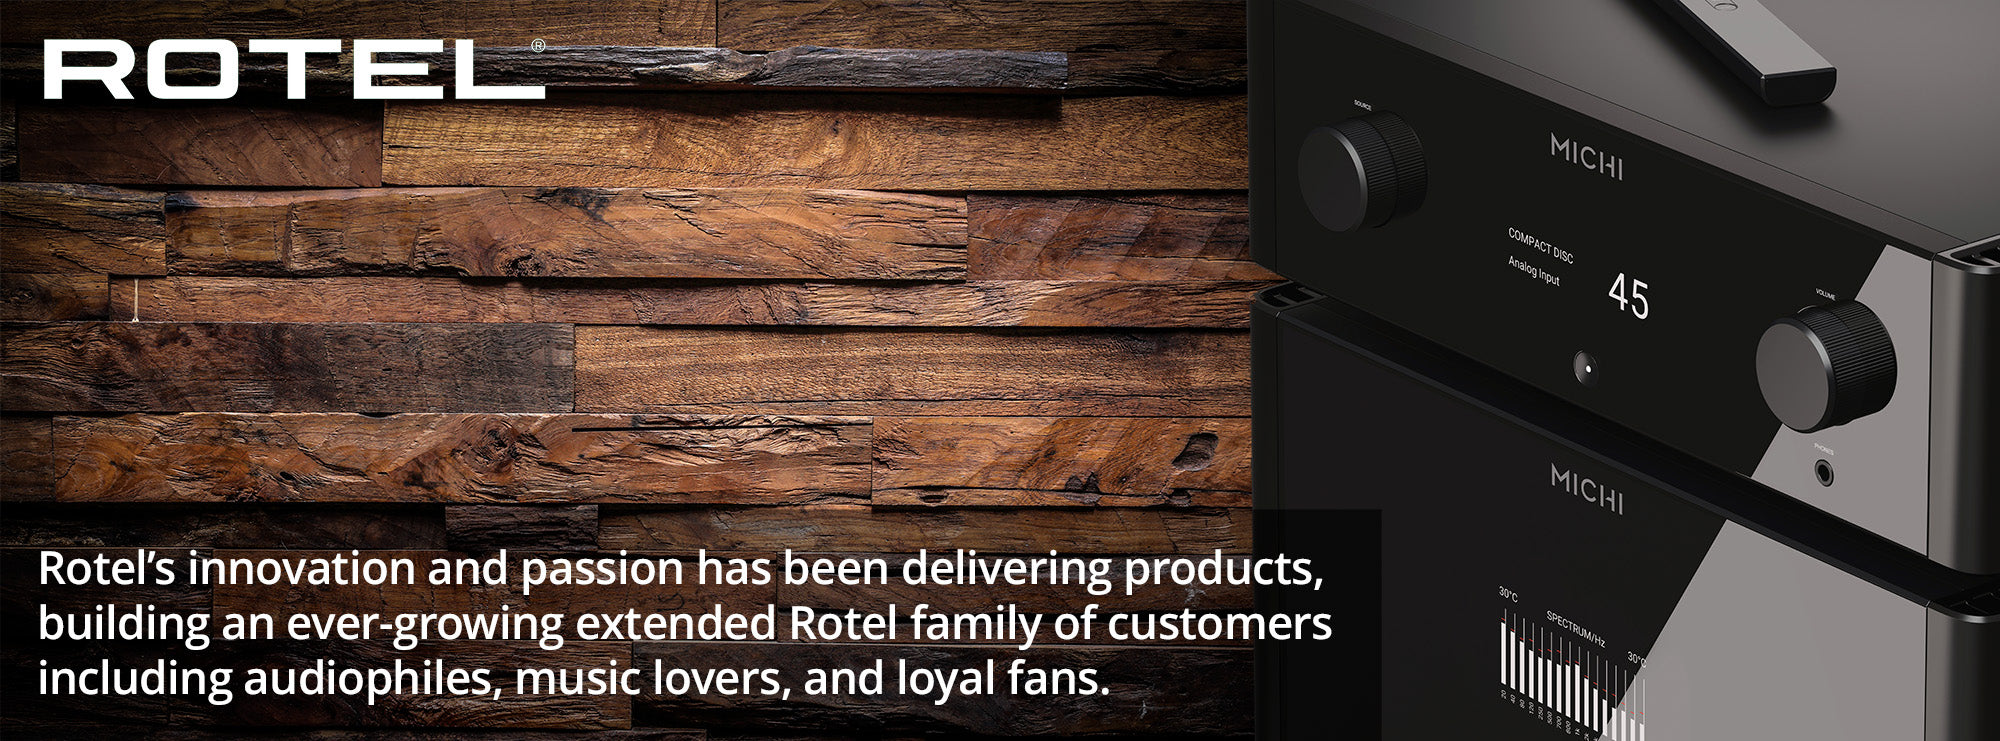 Rotel’s innovation and passion has been delivering products, building an ever-growing extended Rotel family of customers including audiophiles, music lovers, and loyal fans.